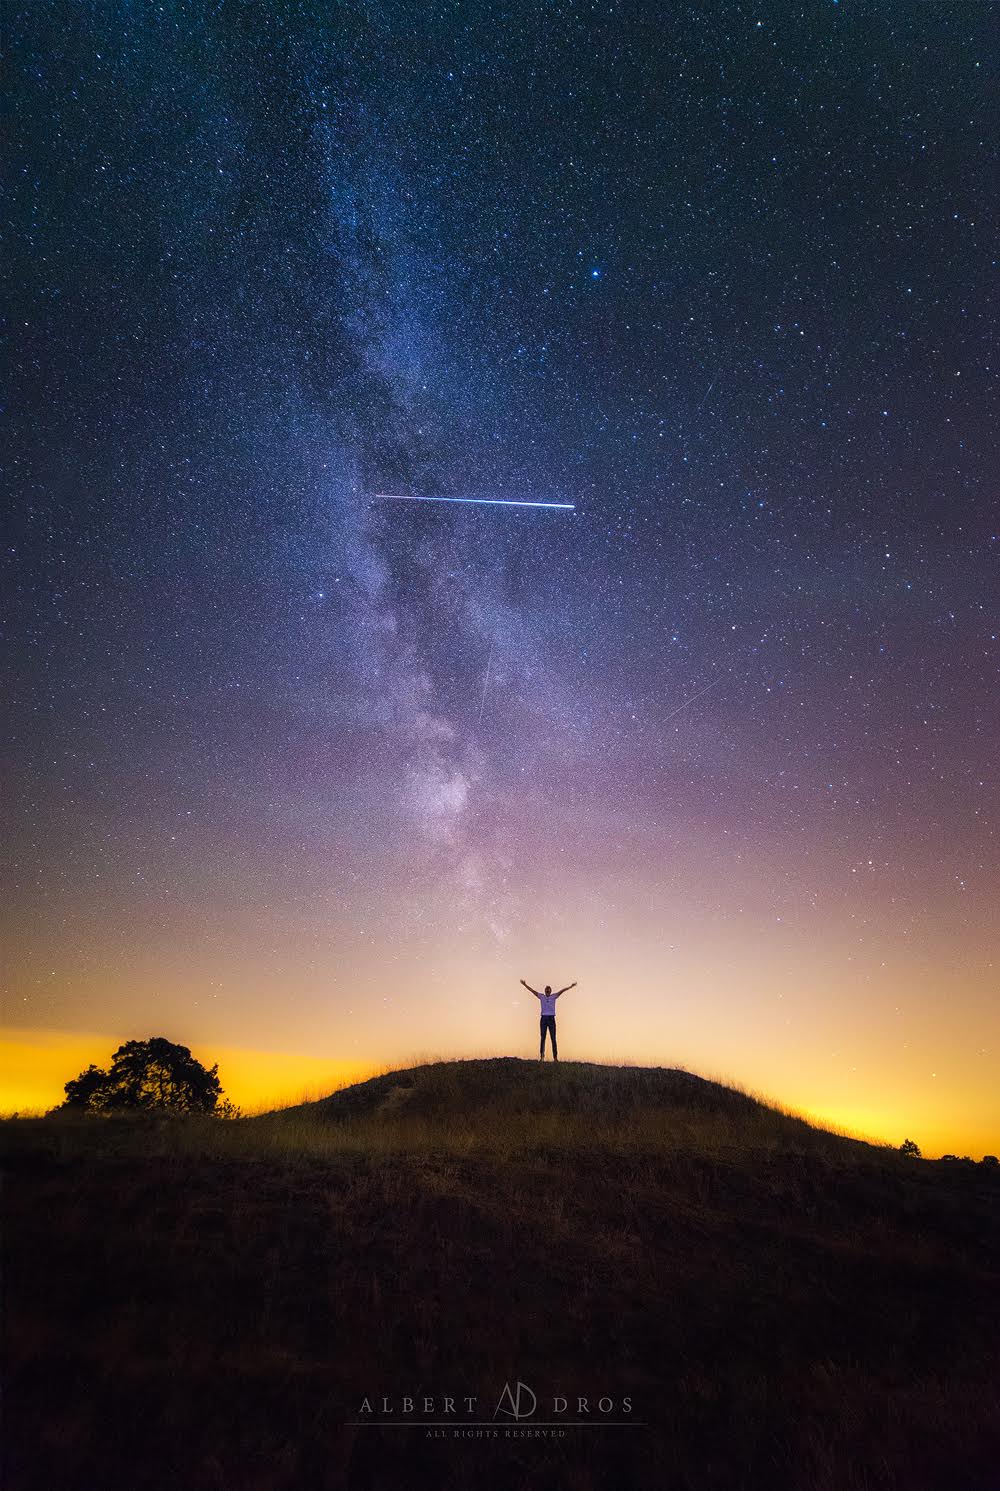 The ISS Photobombed This Photographer’s Perseid Meteor Shower Shoot